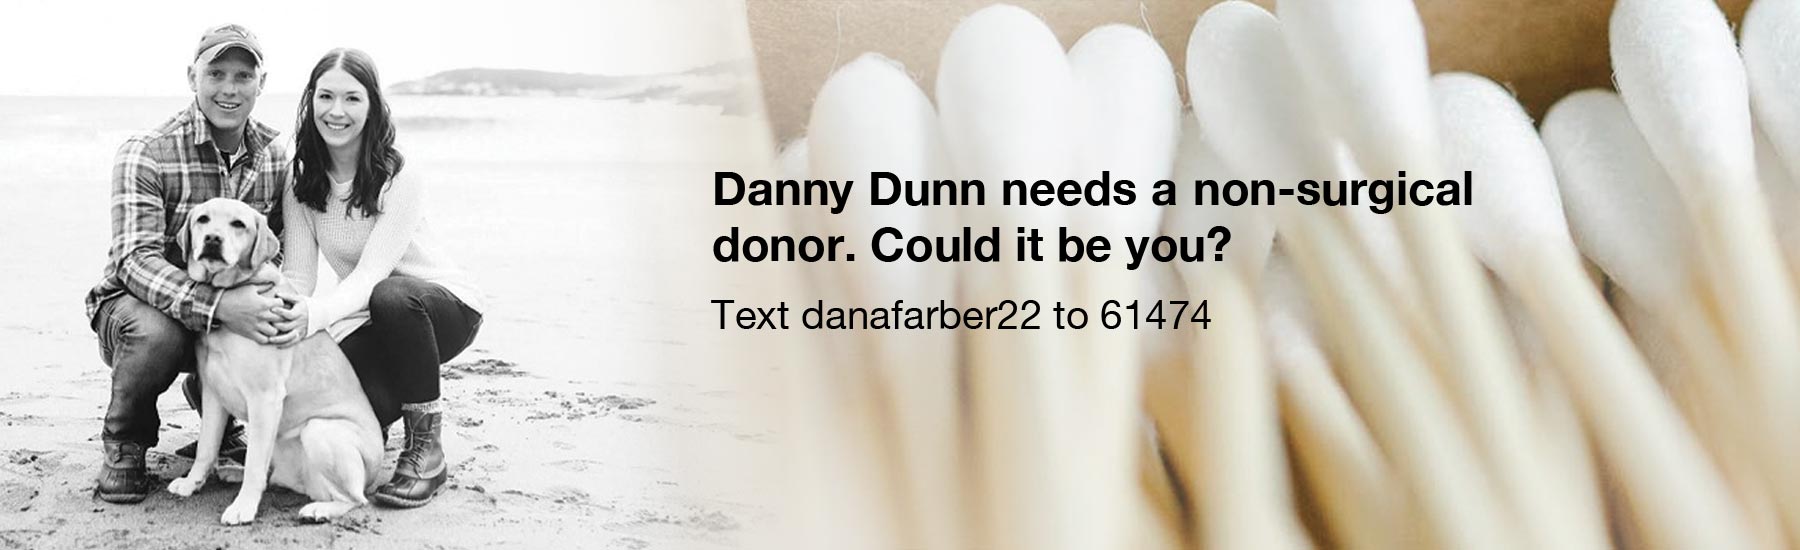 Danny Dunn needs a non-surgical donor. Could it be you? Text danafarber22 to 61474.